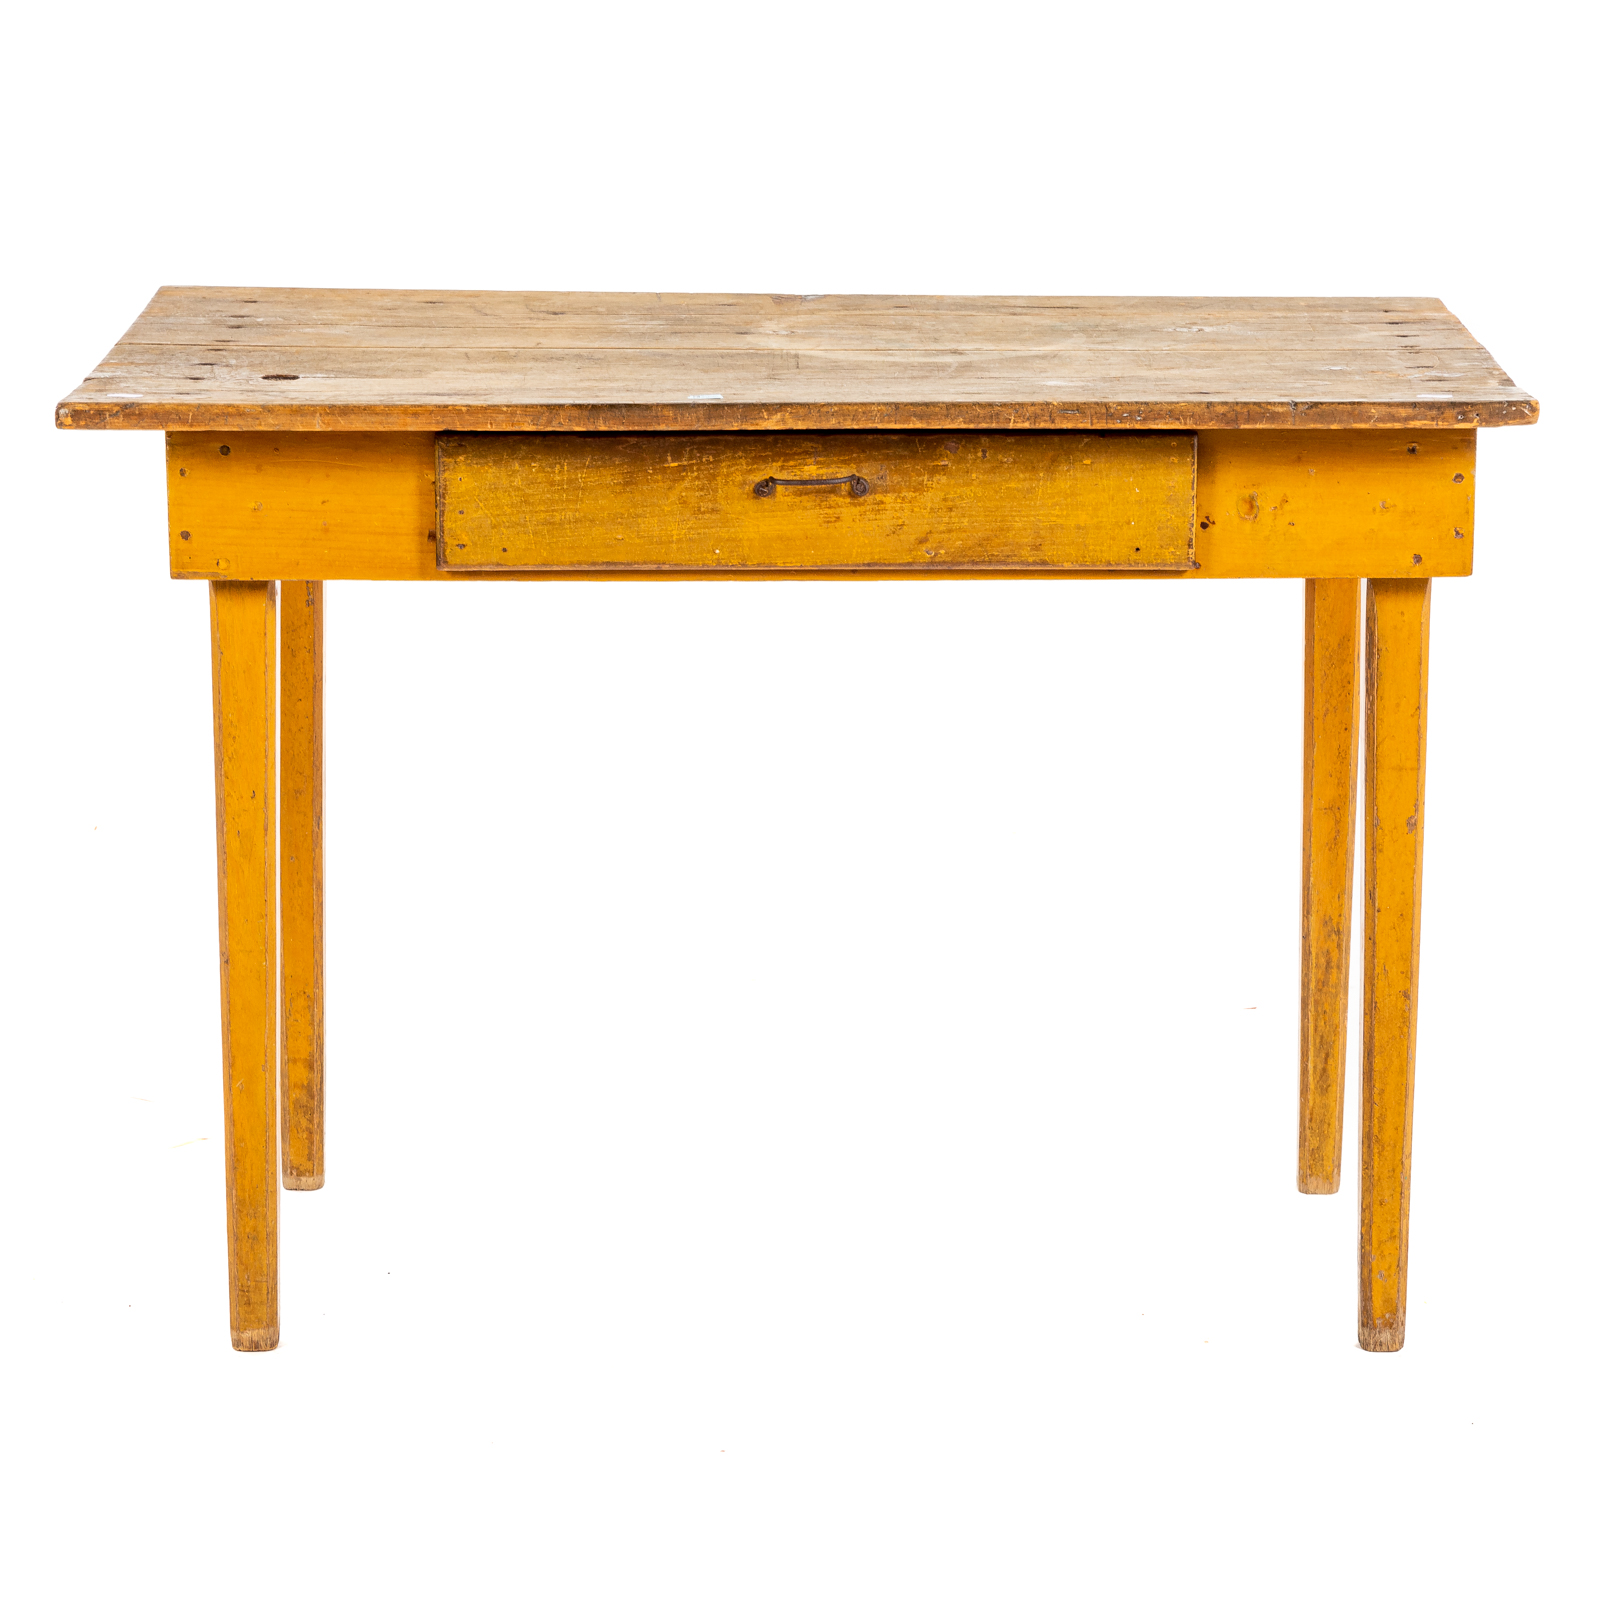 AMERICAN PAINTED PINE TABLE 19th 29dafd